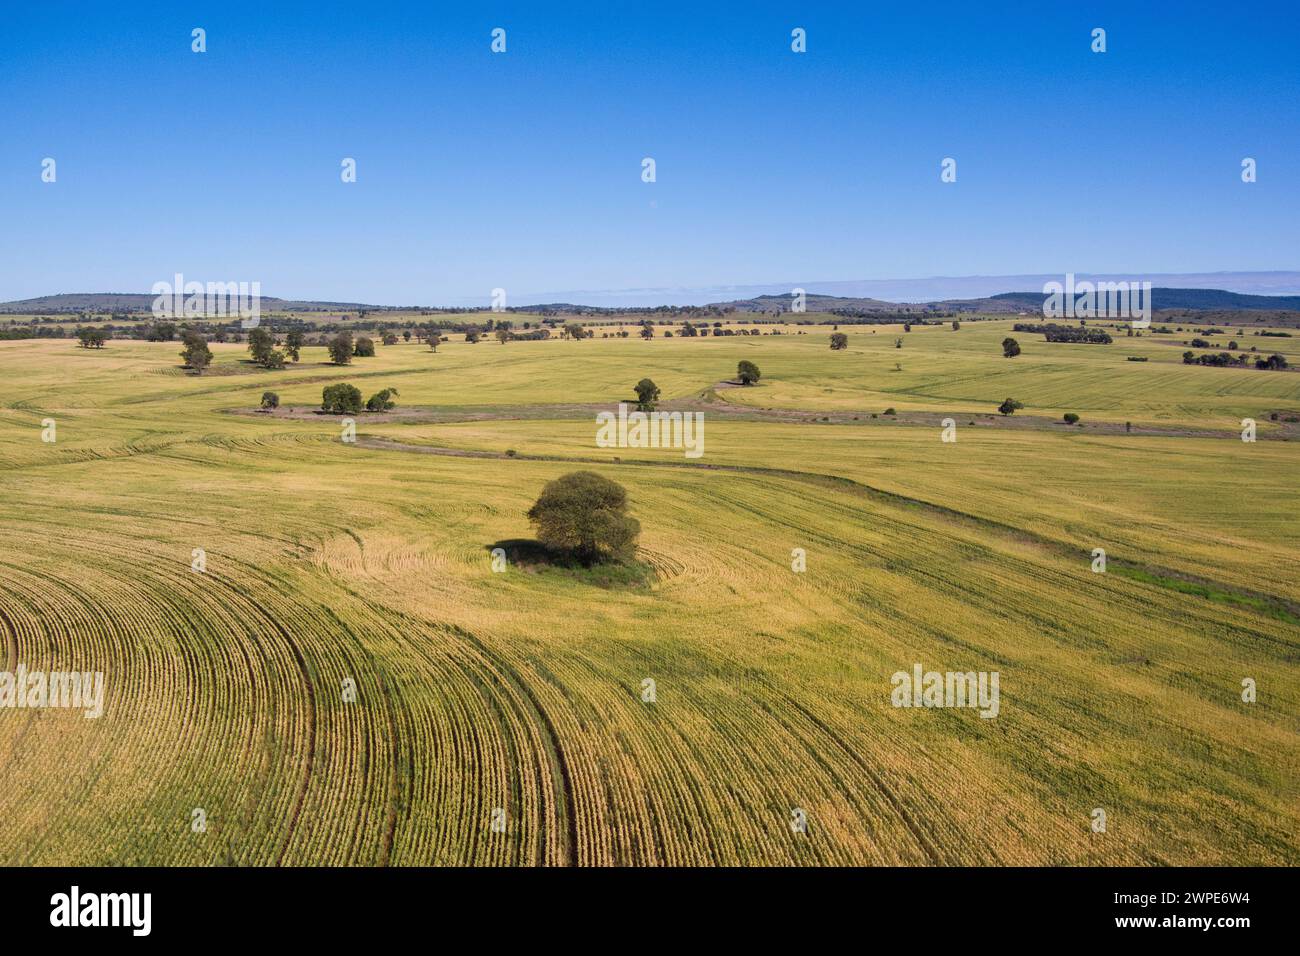 Aerial of lone Queensland Bottle tree surrounded by wheat fields Wallumbilla near Roma Queensland Australia Stock Photo